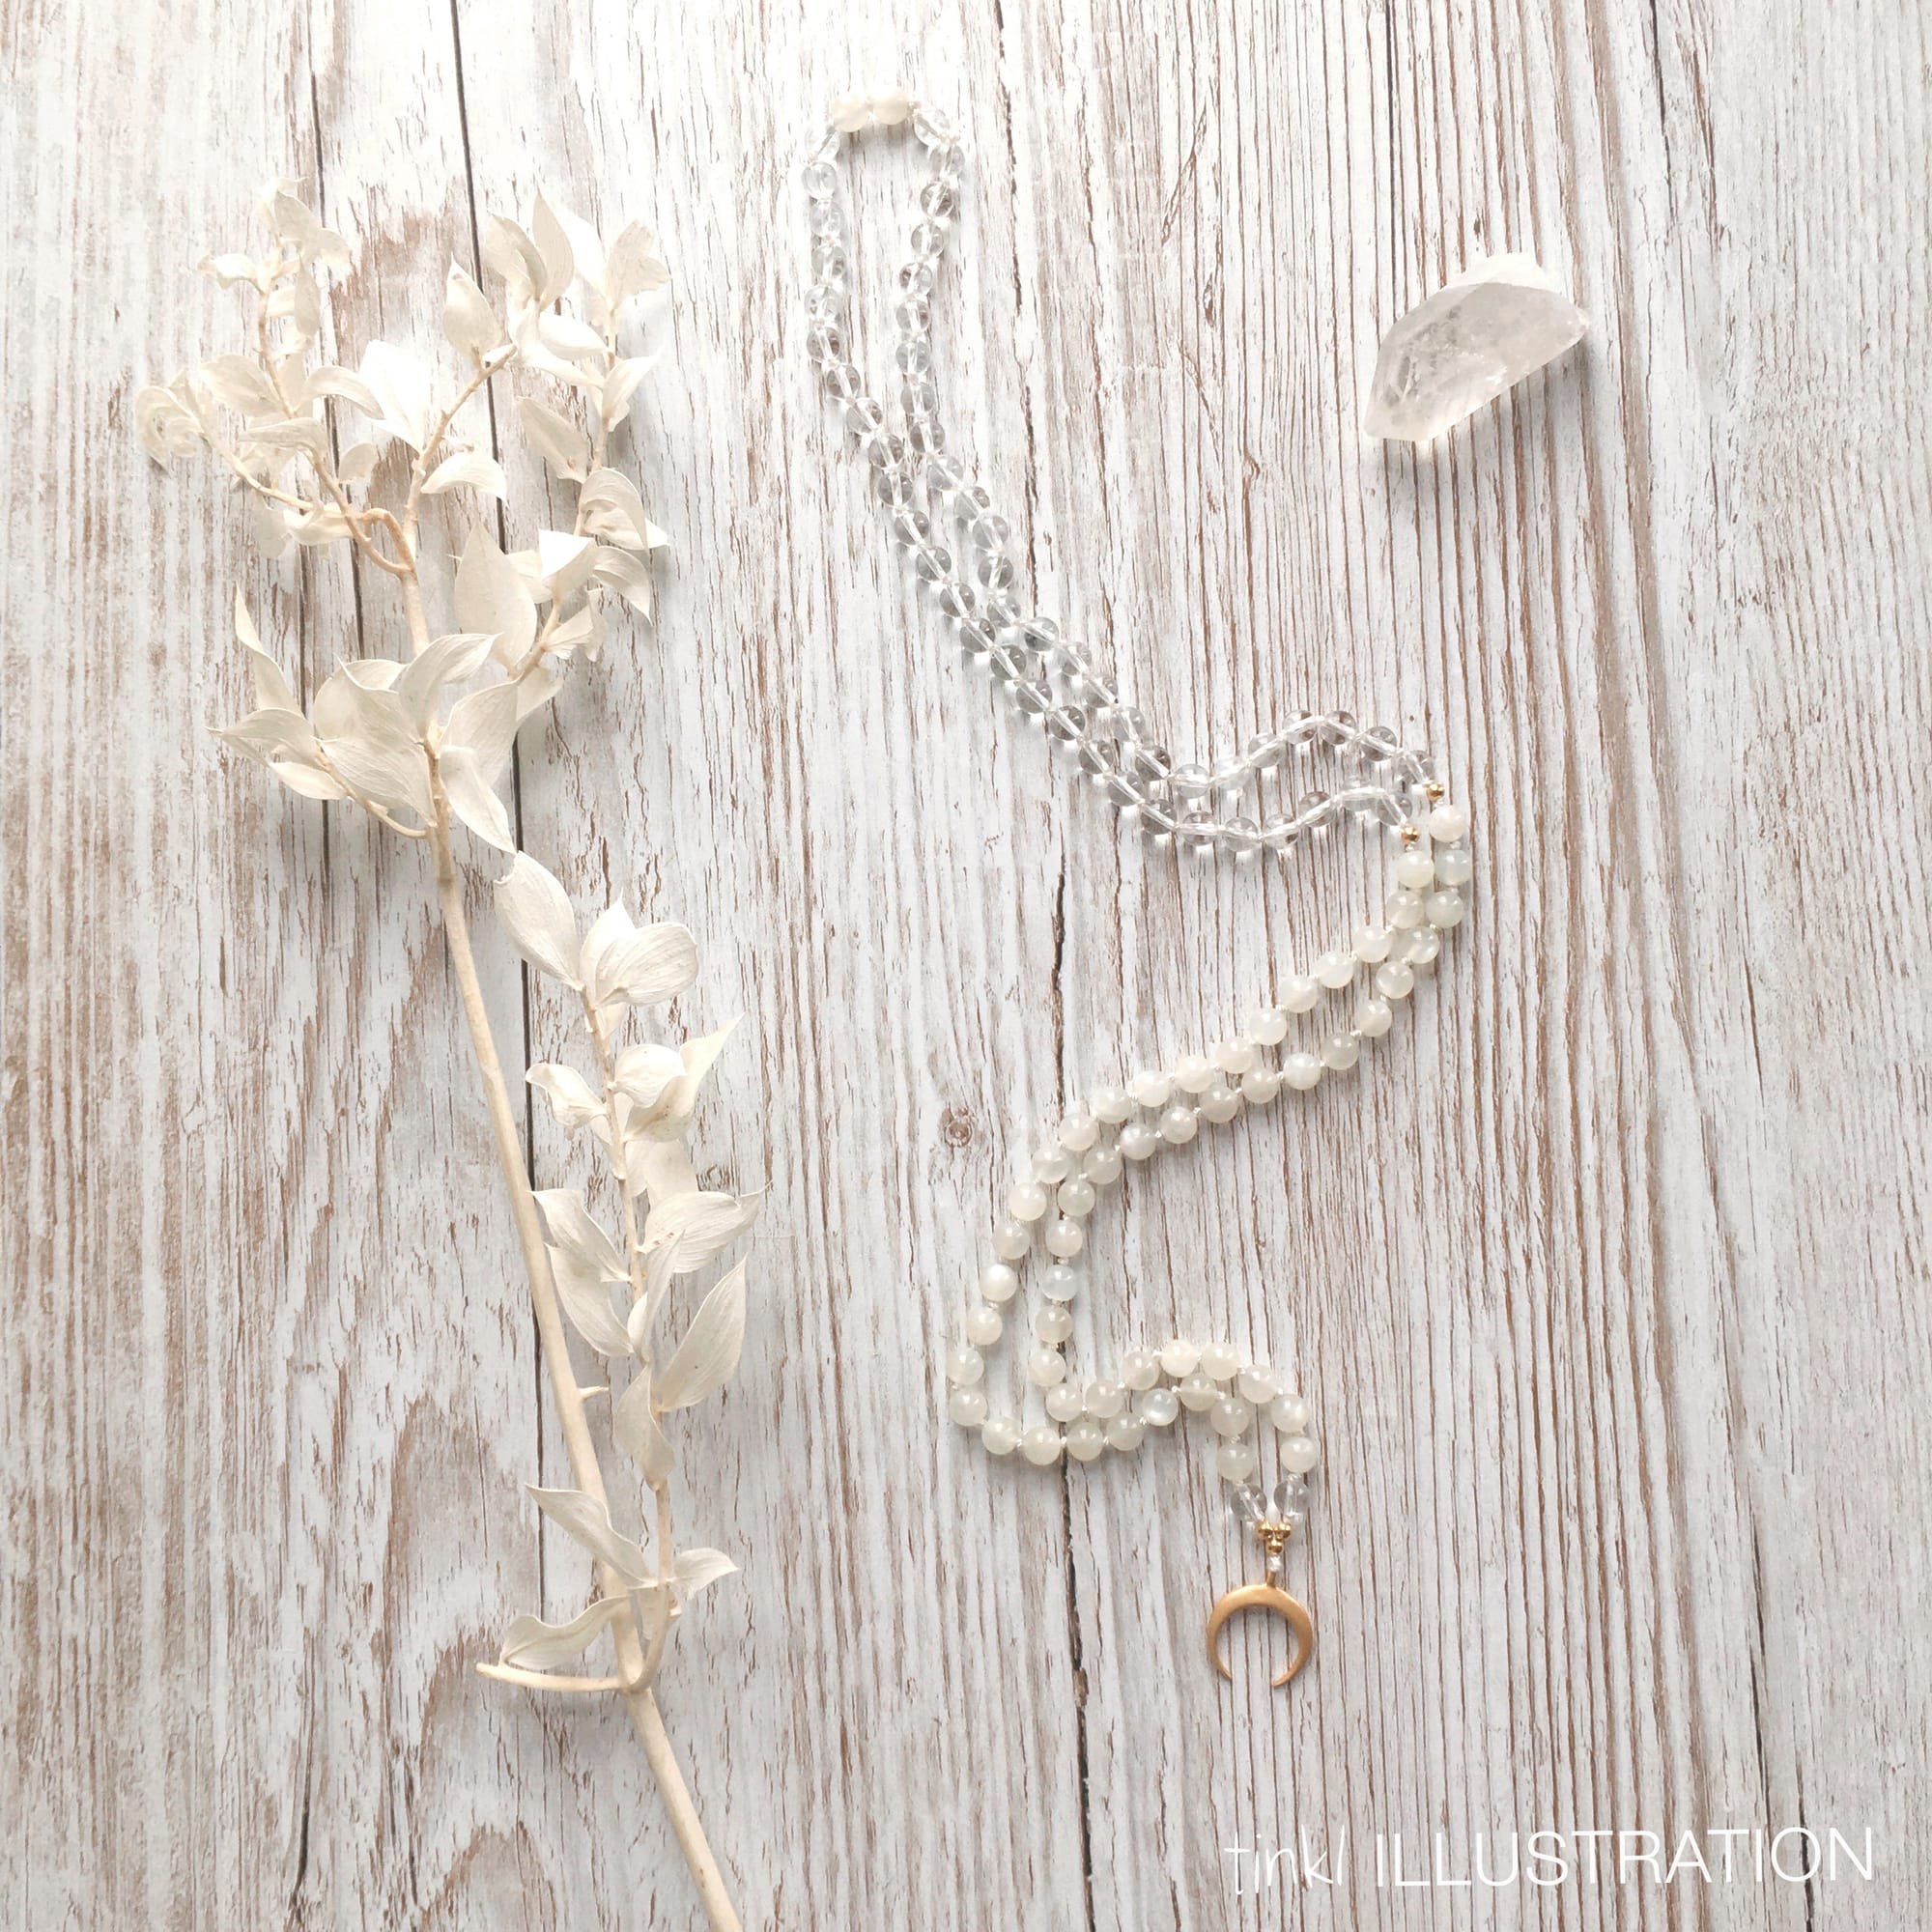 Mala Necklace "Guided by the Moon"